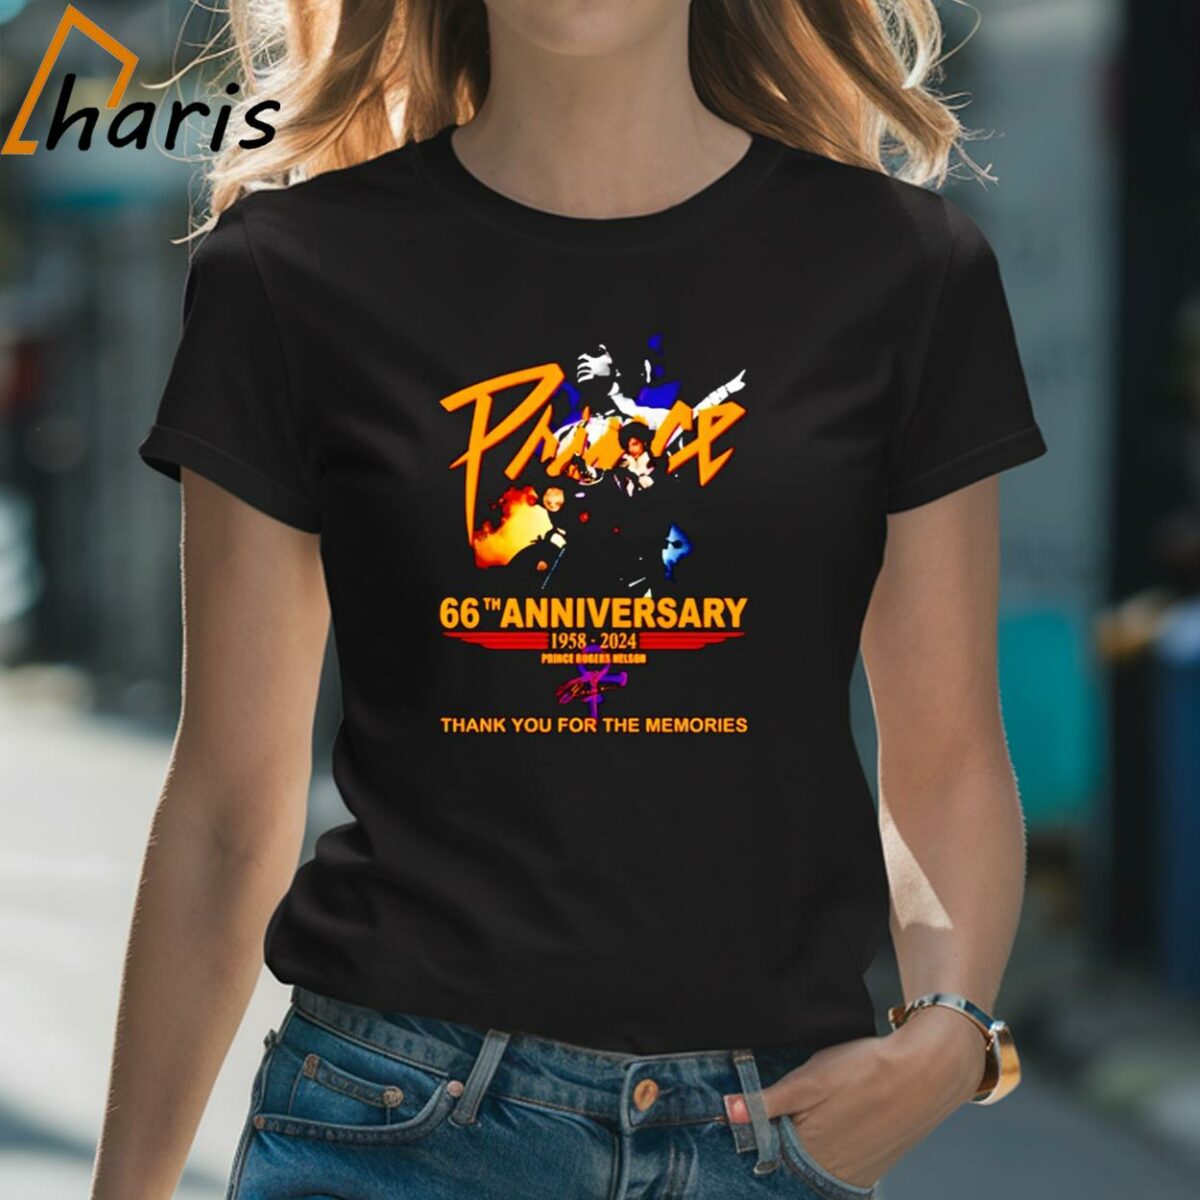 66th Anniversary 1958 2024 Prince Rogers Nelson Thank You For The Memories shirt 2 Shirt